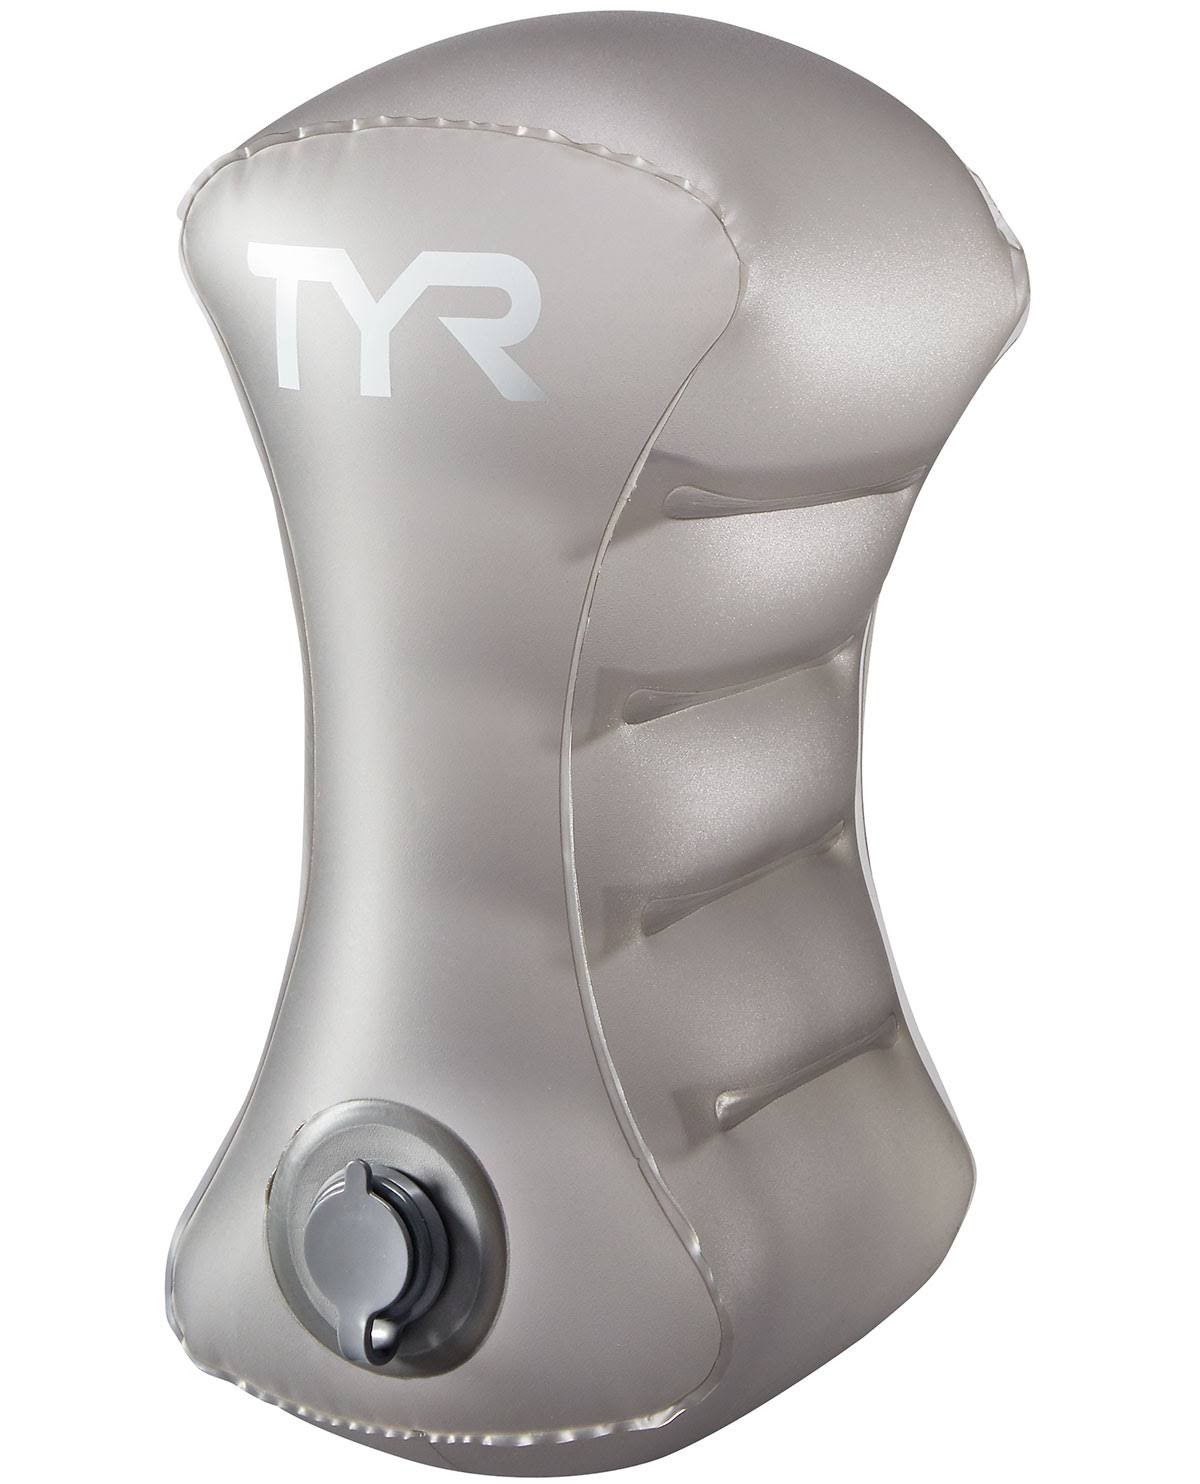 Tyr Inflatable Pull Float